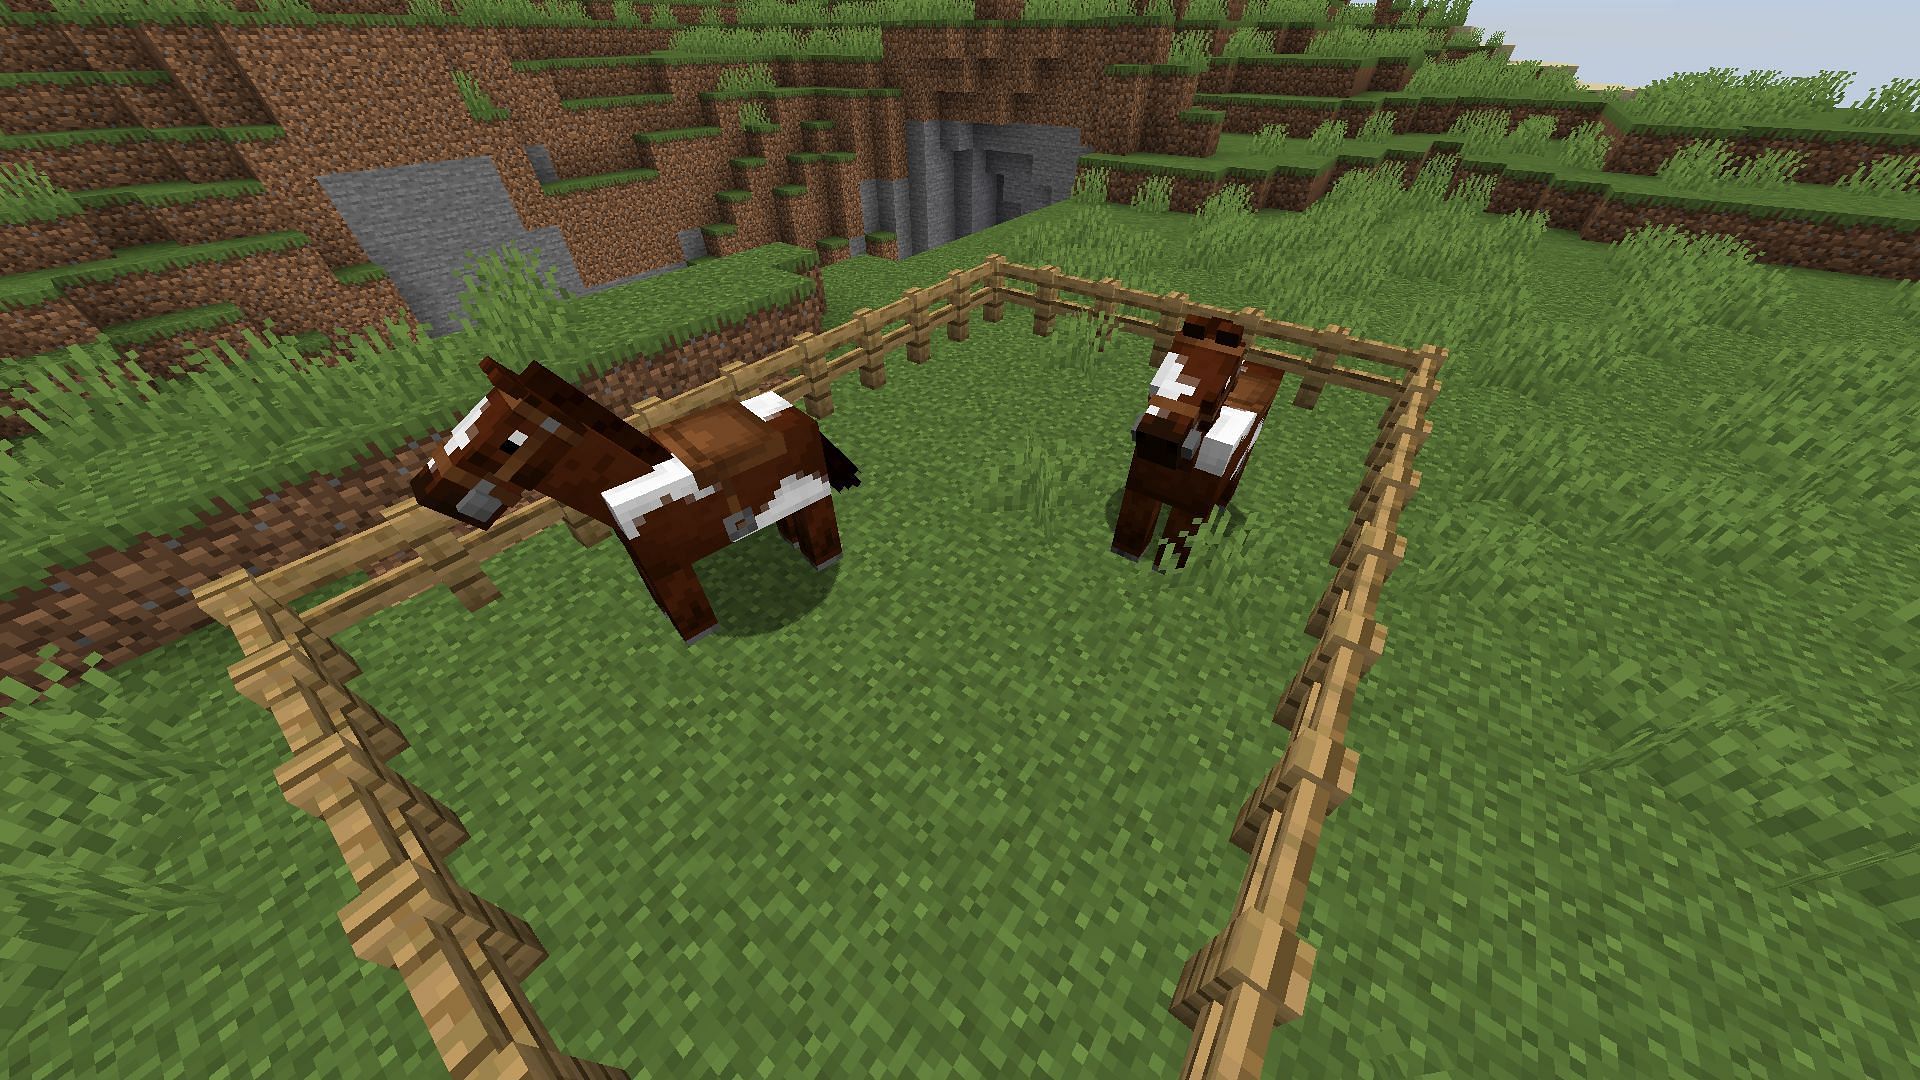 Horse breeding and their stats transferring have improved in Minecraft 1.19.4 update (Image via Mojang)